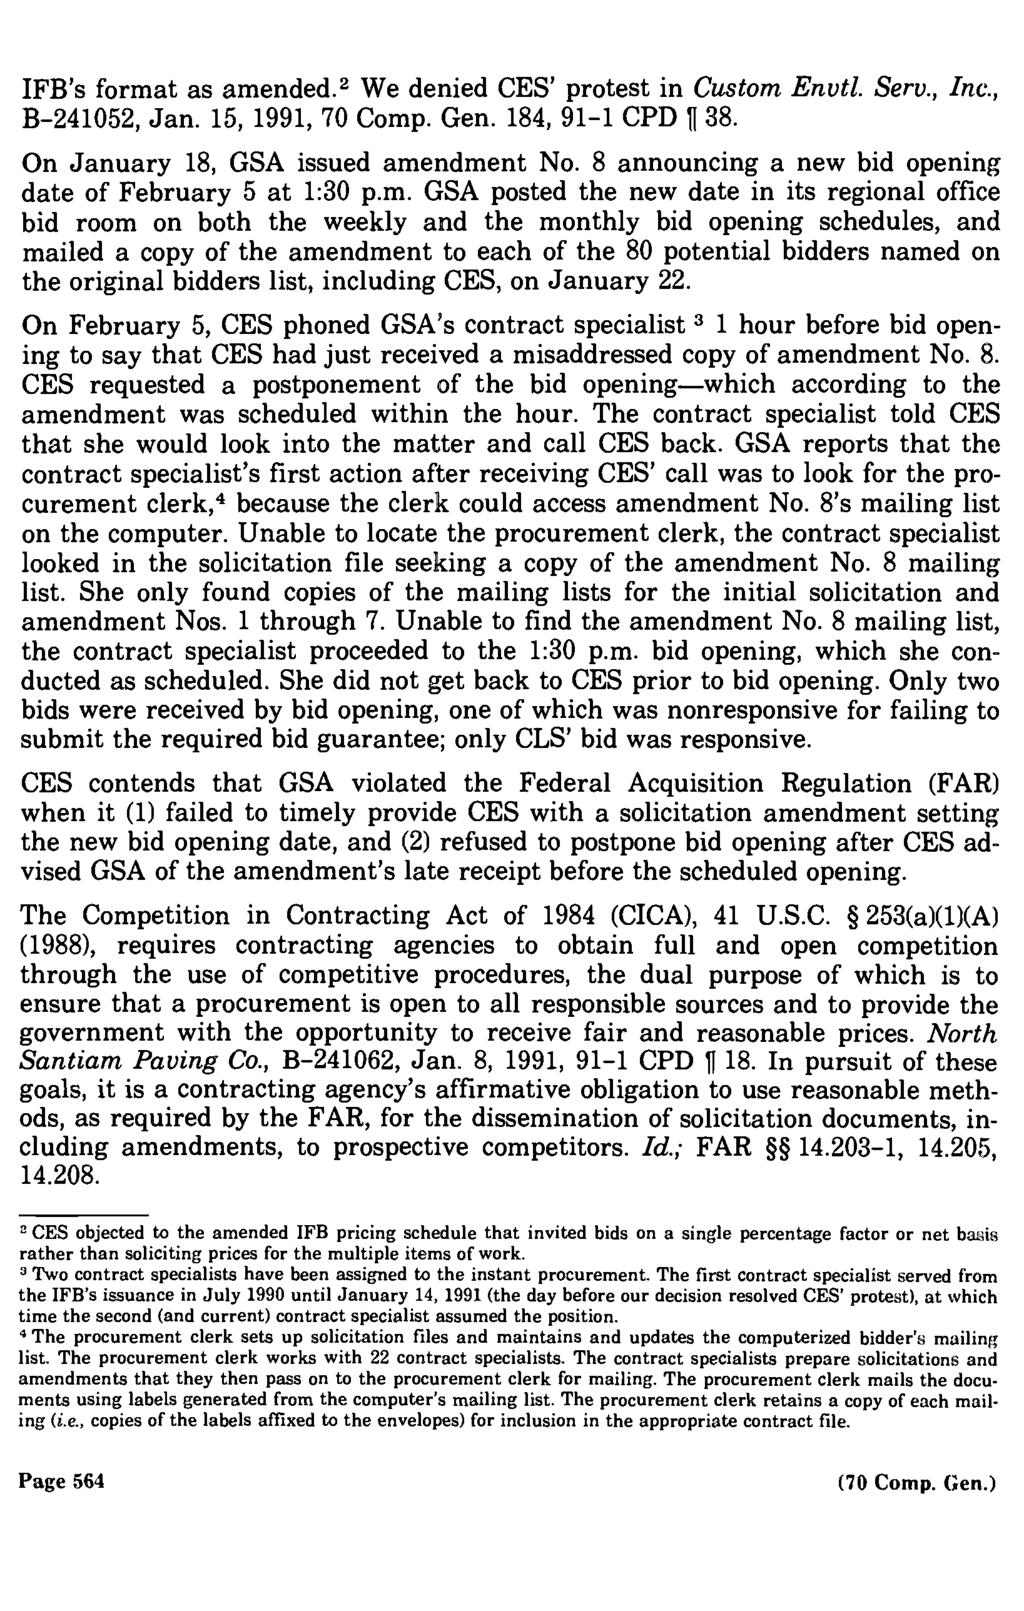 IFB's format as amended.2 We denied CES' protest in Custom Envtl. Serv., Inc., B 241052, Jan. 15, 1991, 70 Comp. Gen. 184, 91 1 CPD 11 38. On January 18, GSA issued amendment No.